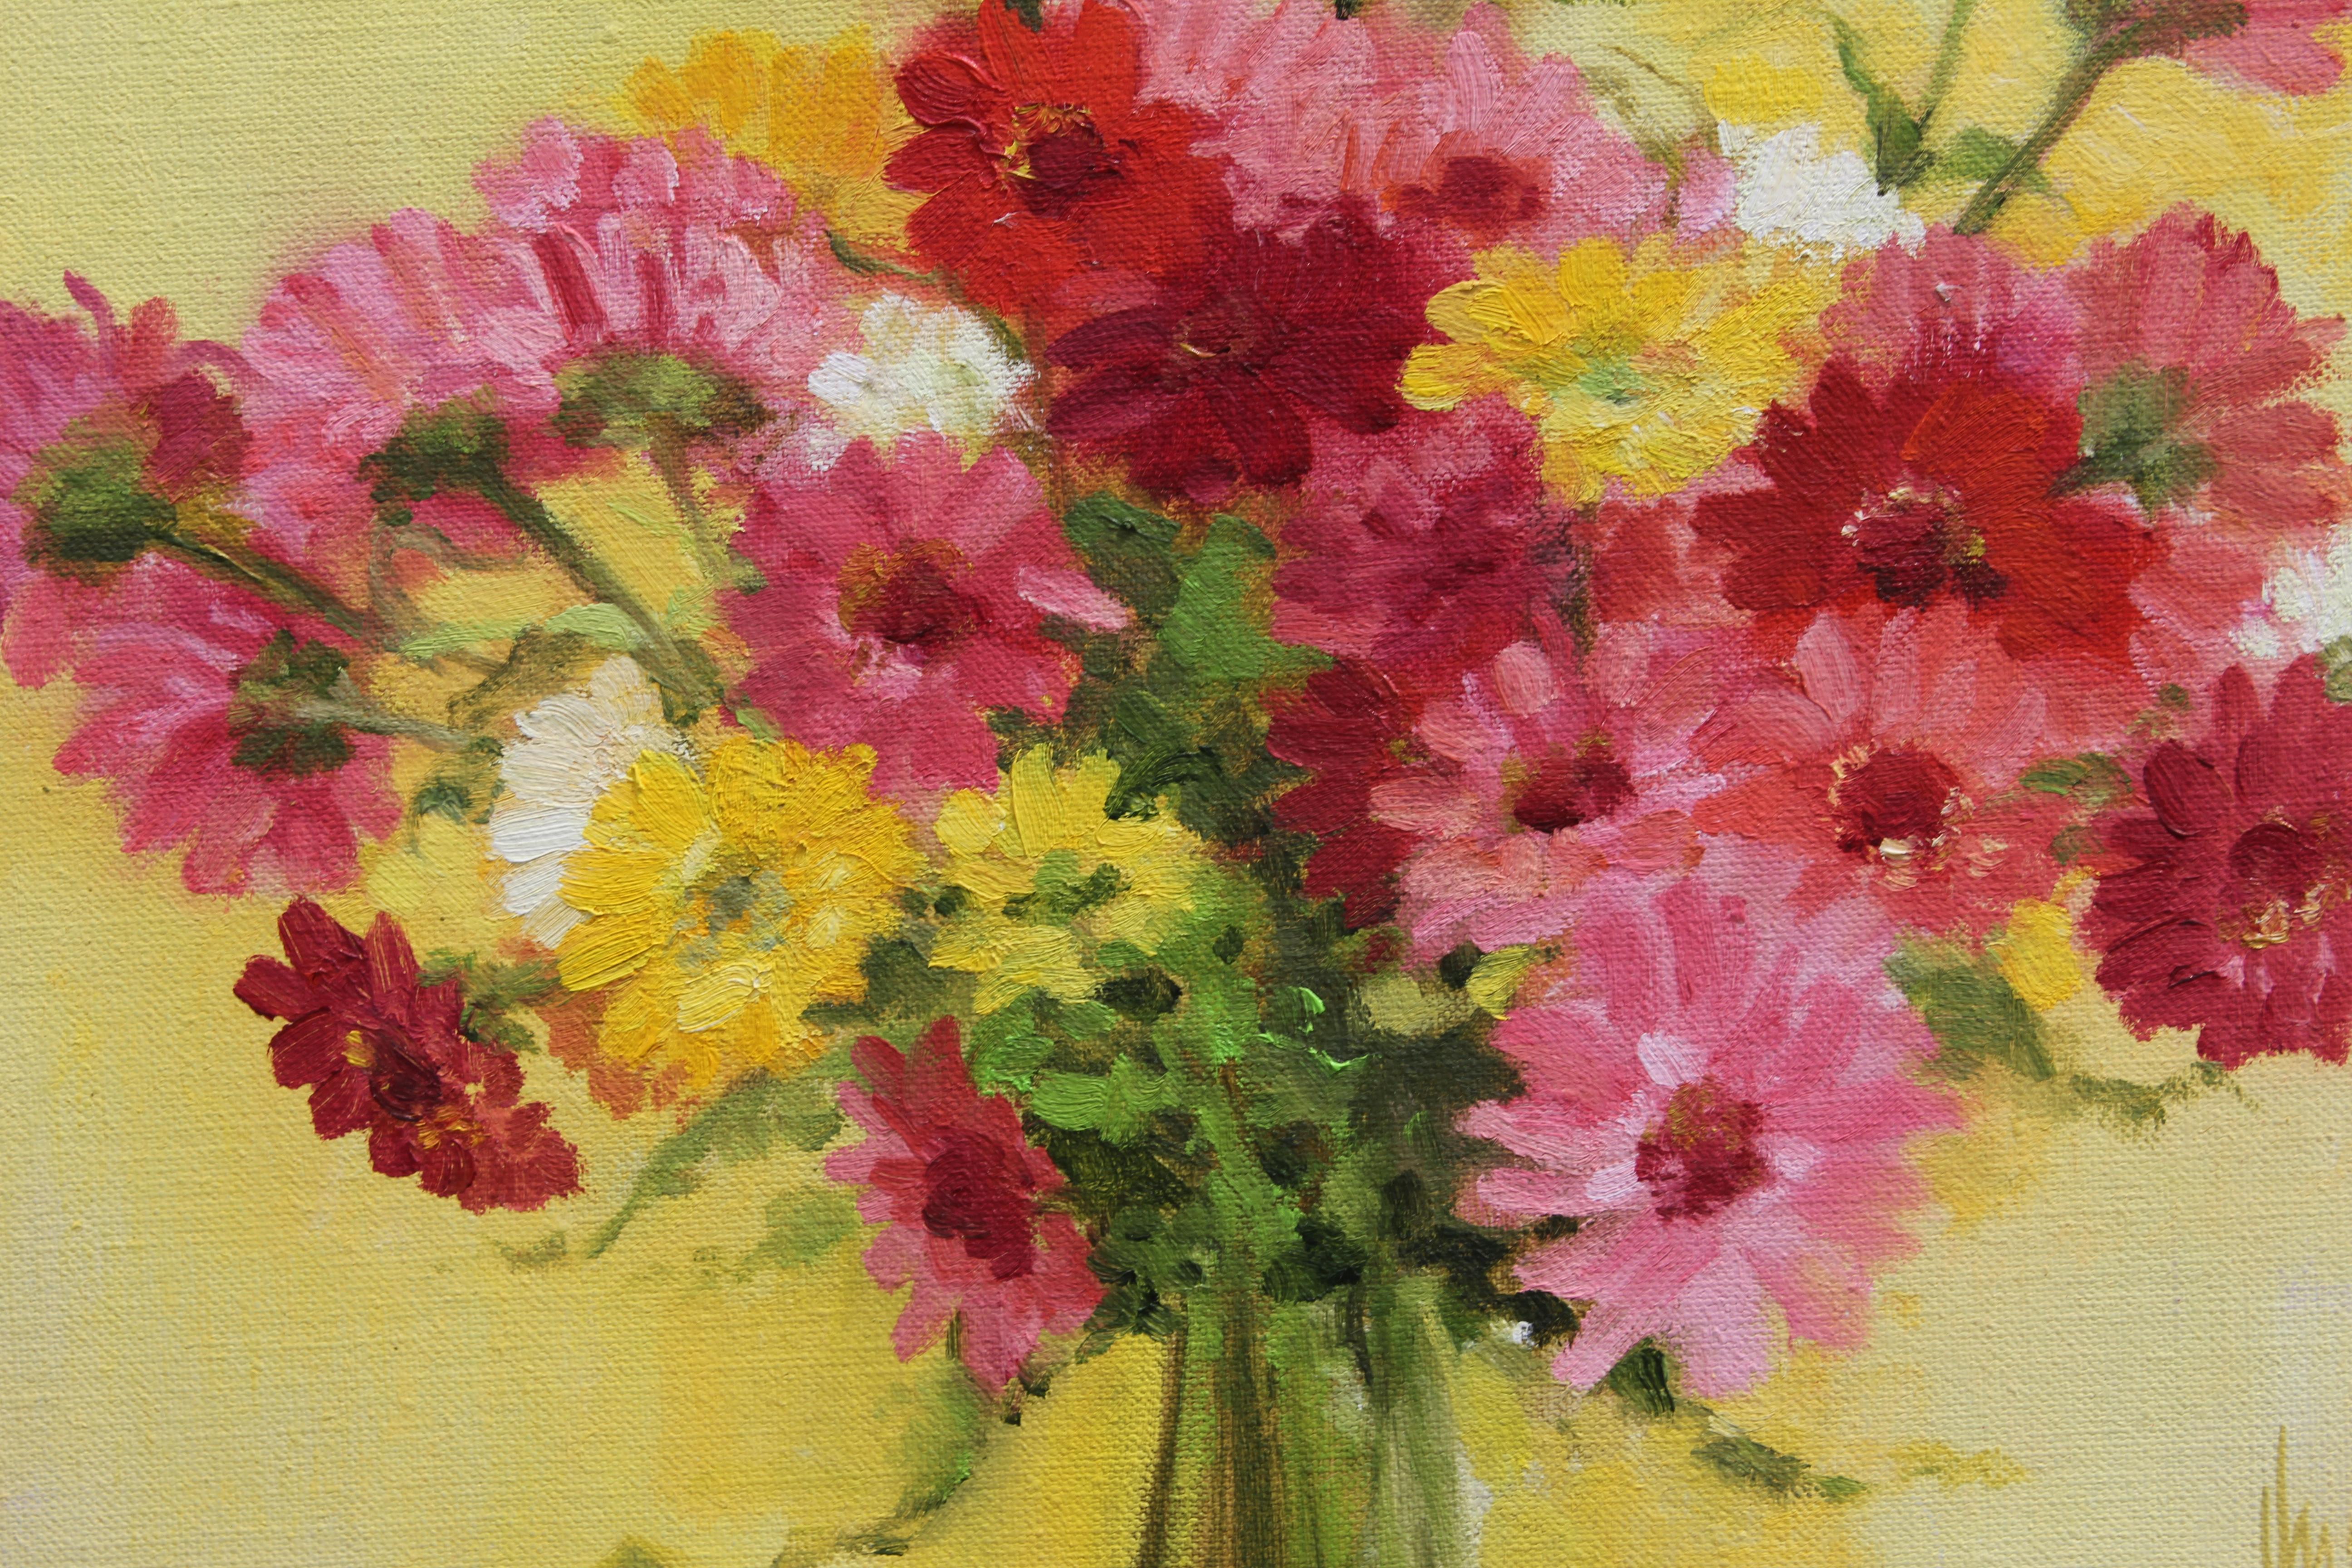 Pink, Red, and Yellow Floral Boquet - Painting by Henri Gadbois